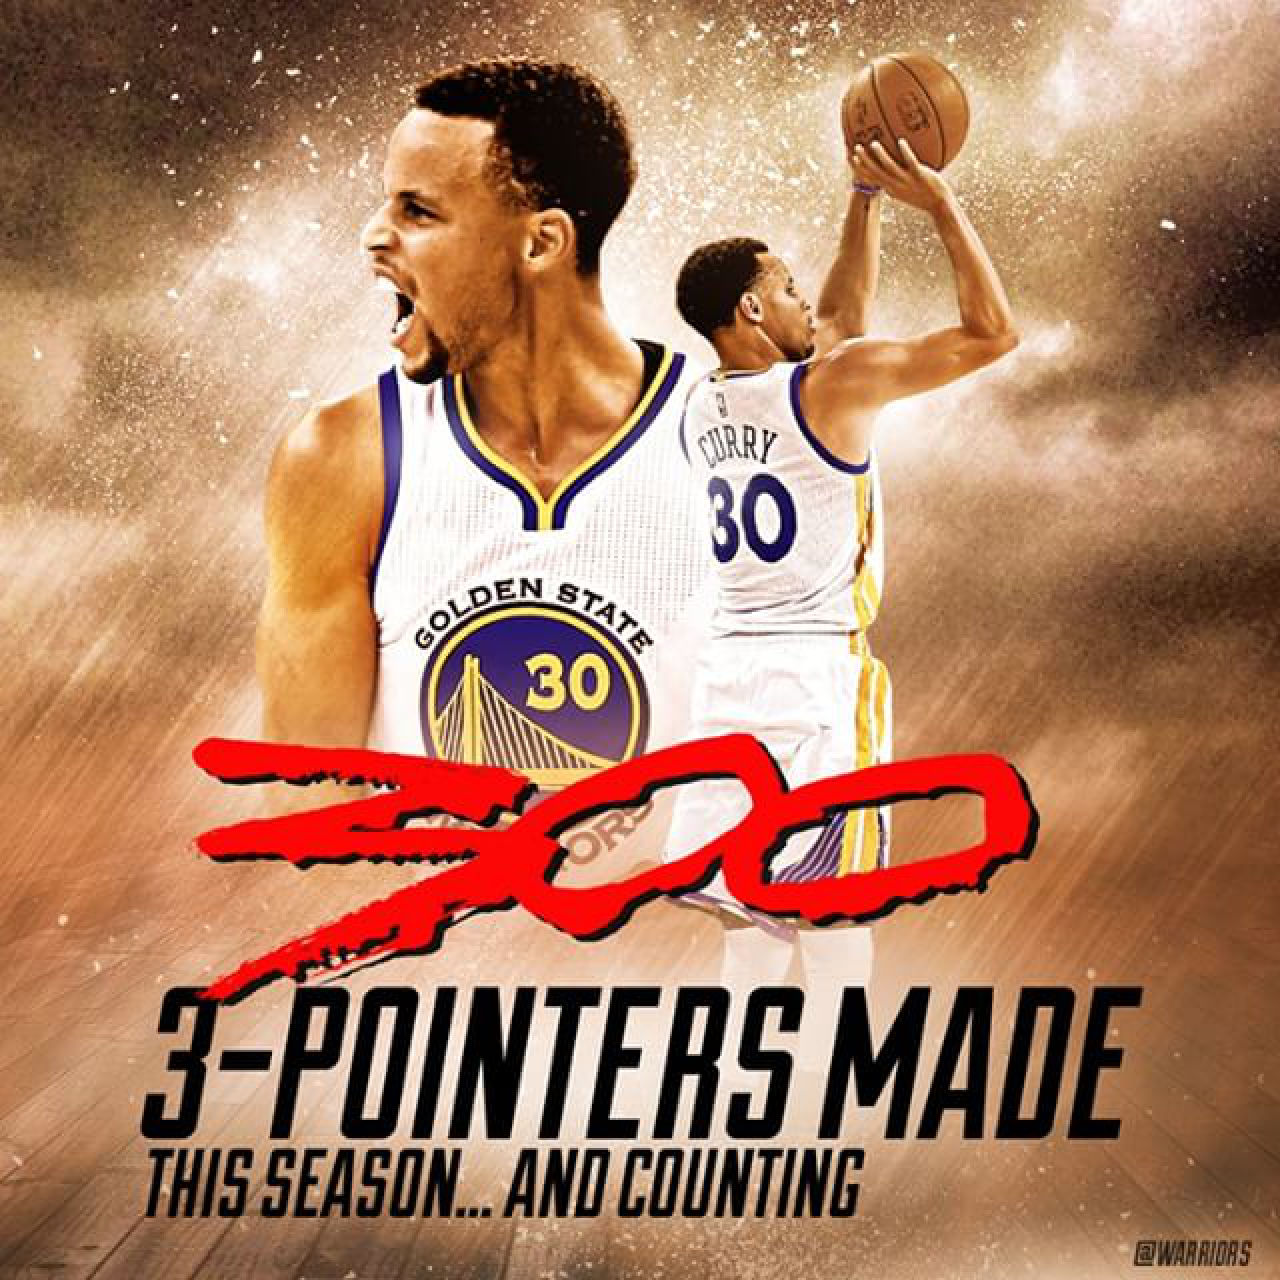 Steph Curry 300 3-pointers... and counting